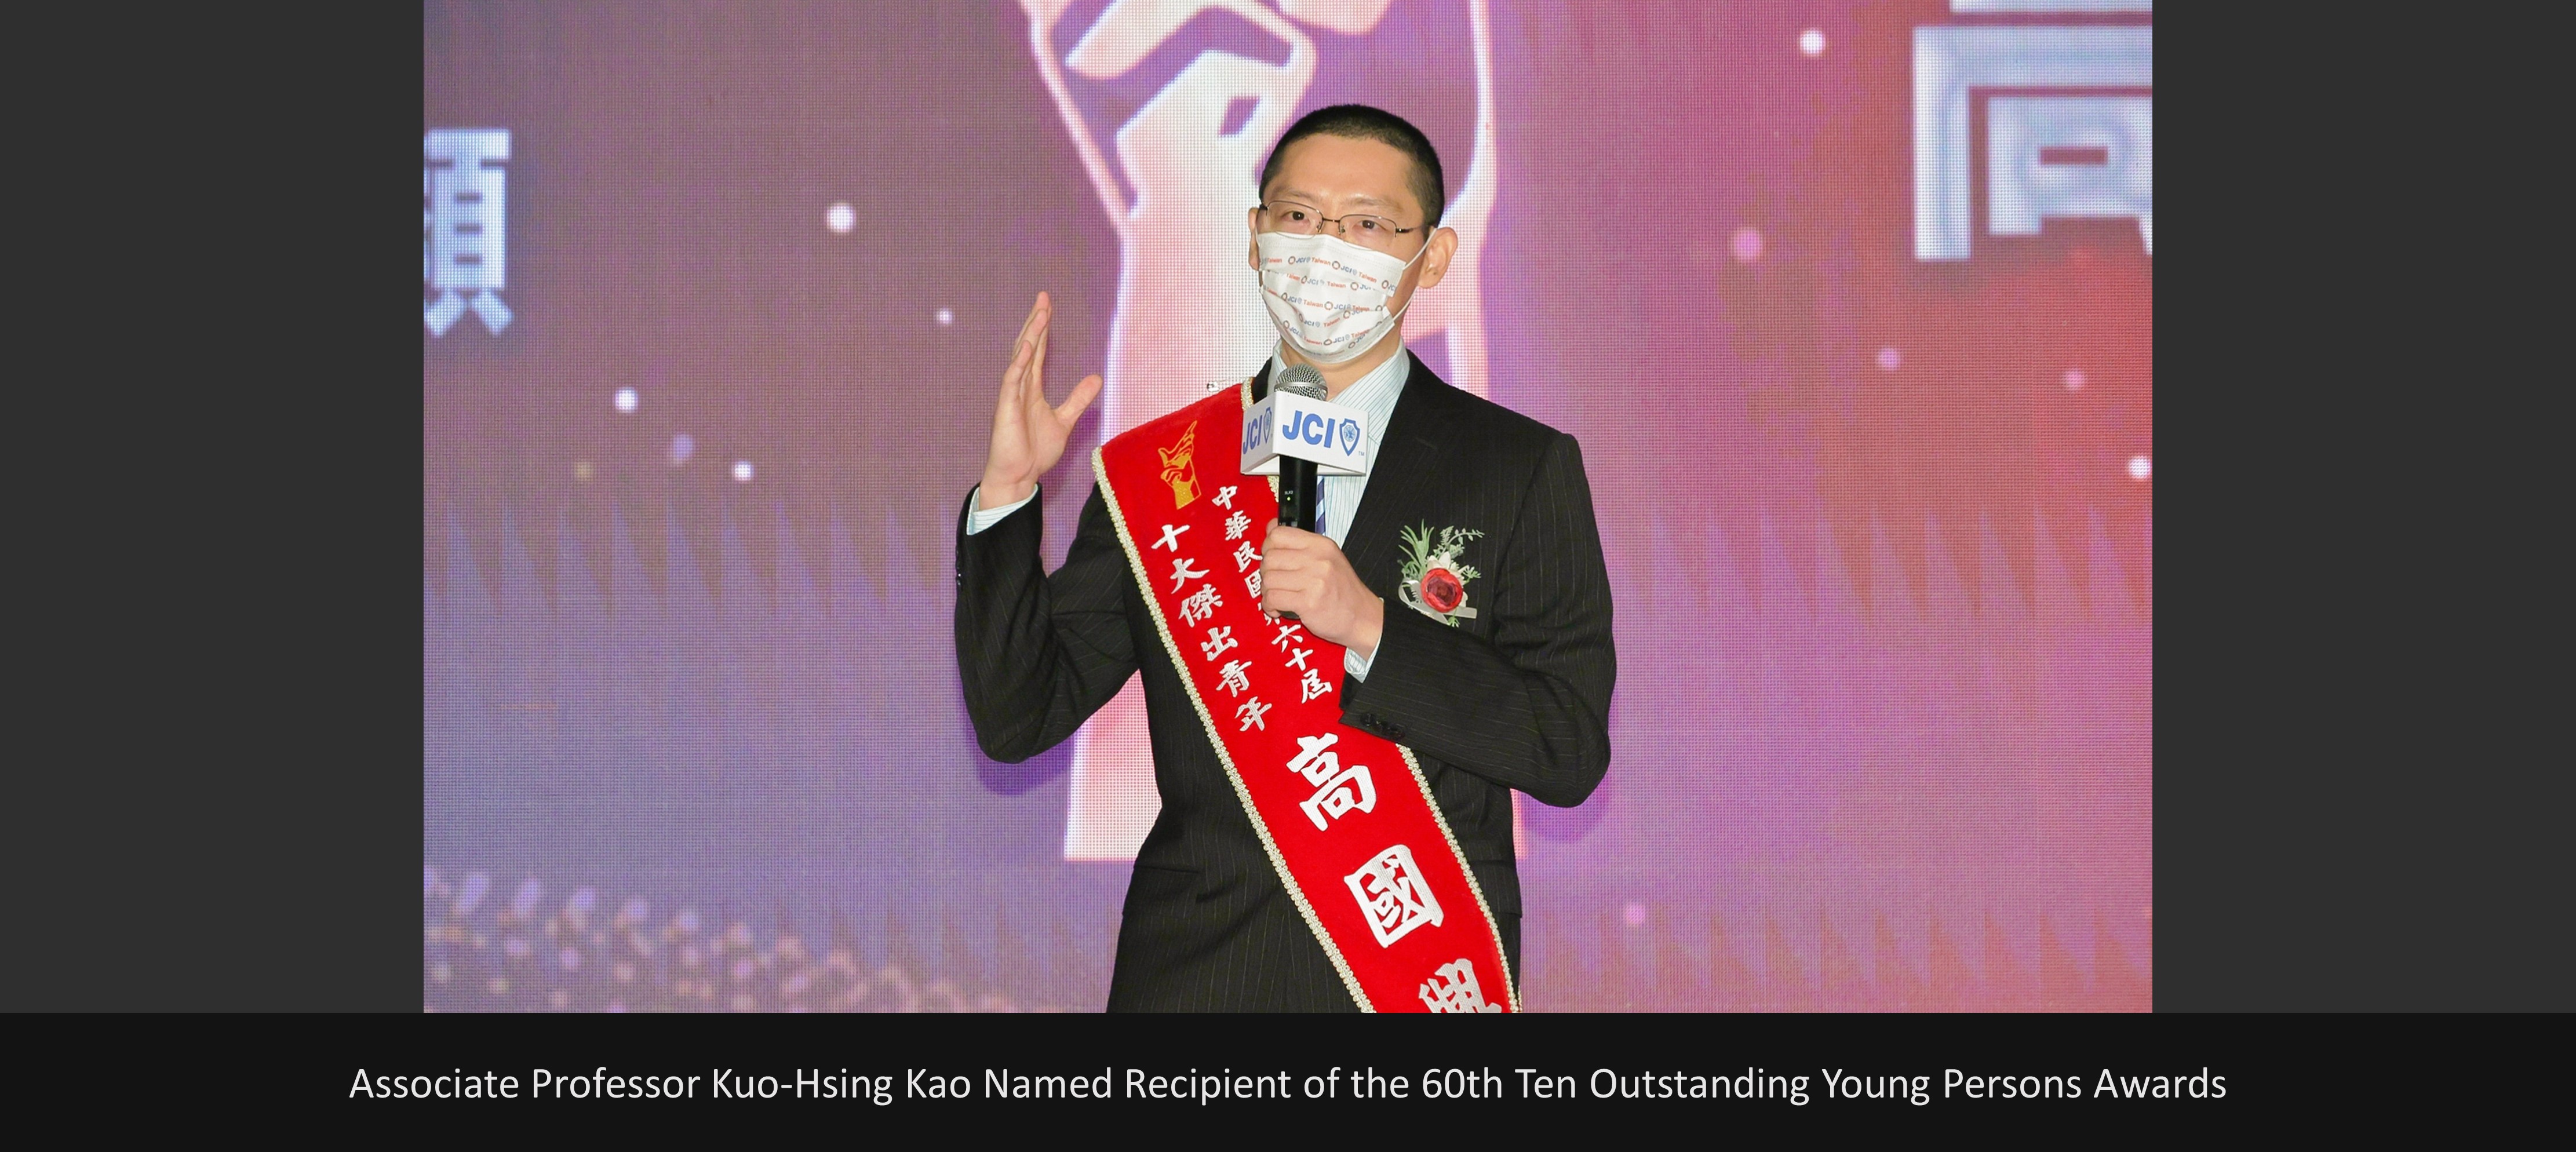 Associate Professor  Kuo-Hsing Kao  Named Recipient of the 60th Ten Outstanding Young Persons Awards